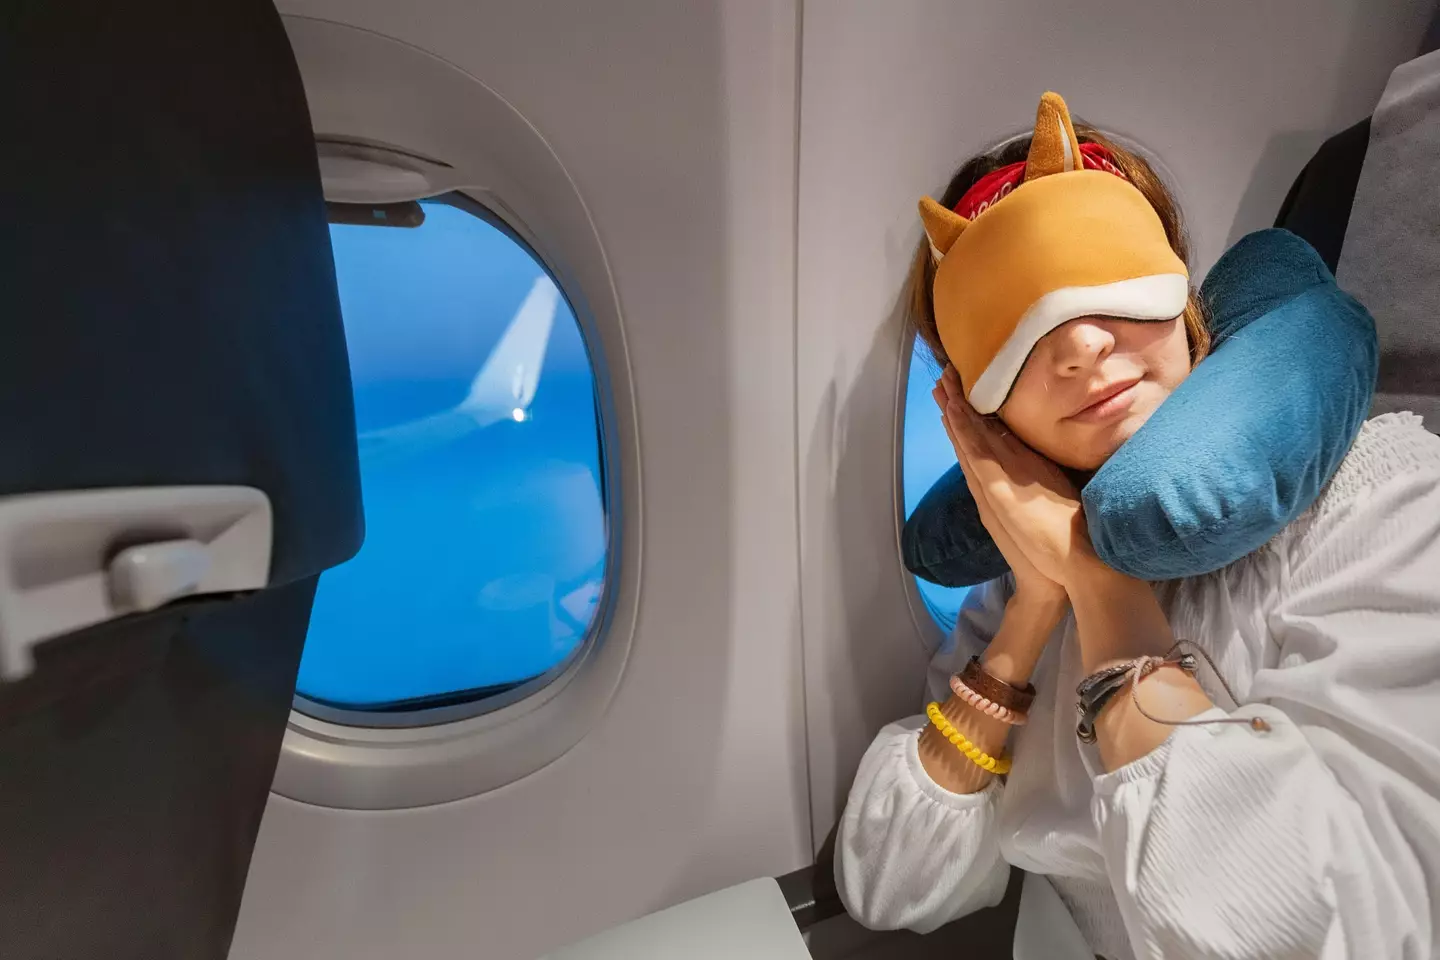 A lot of people use neck pillows to help them sleep on planes.